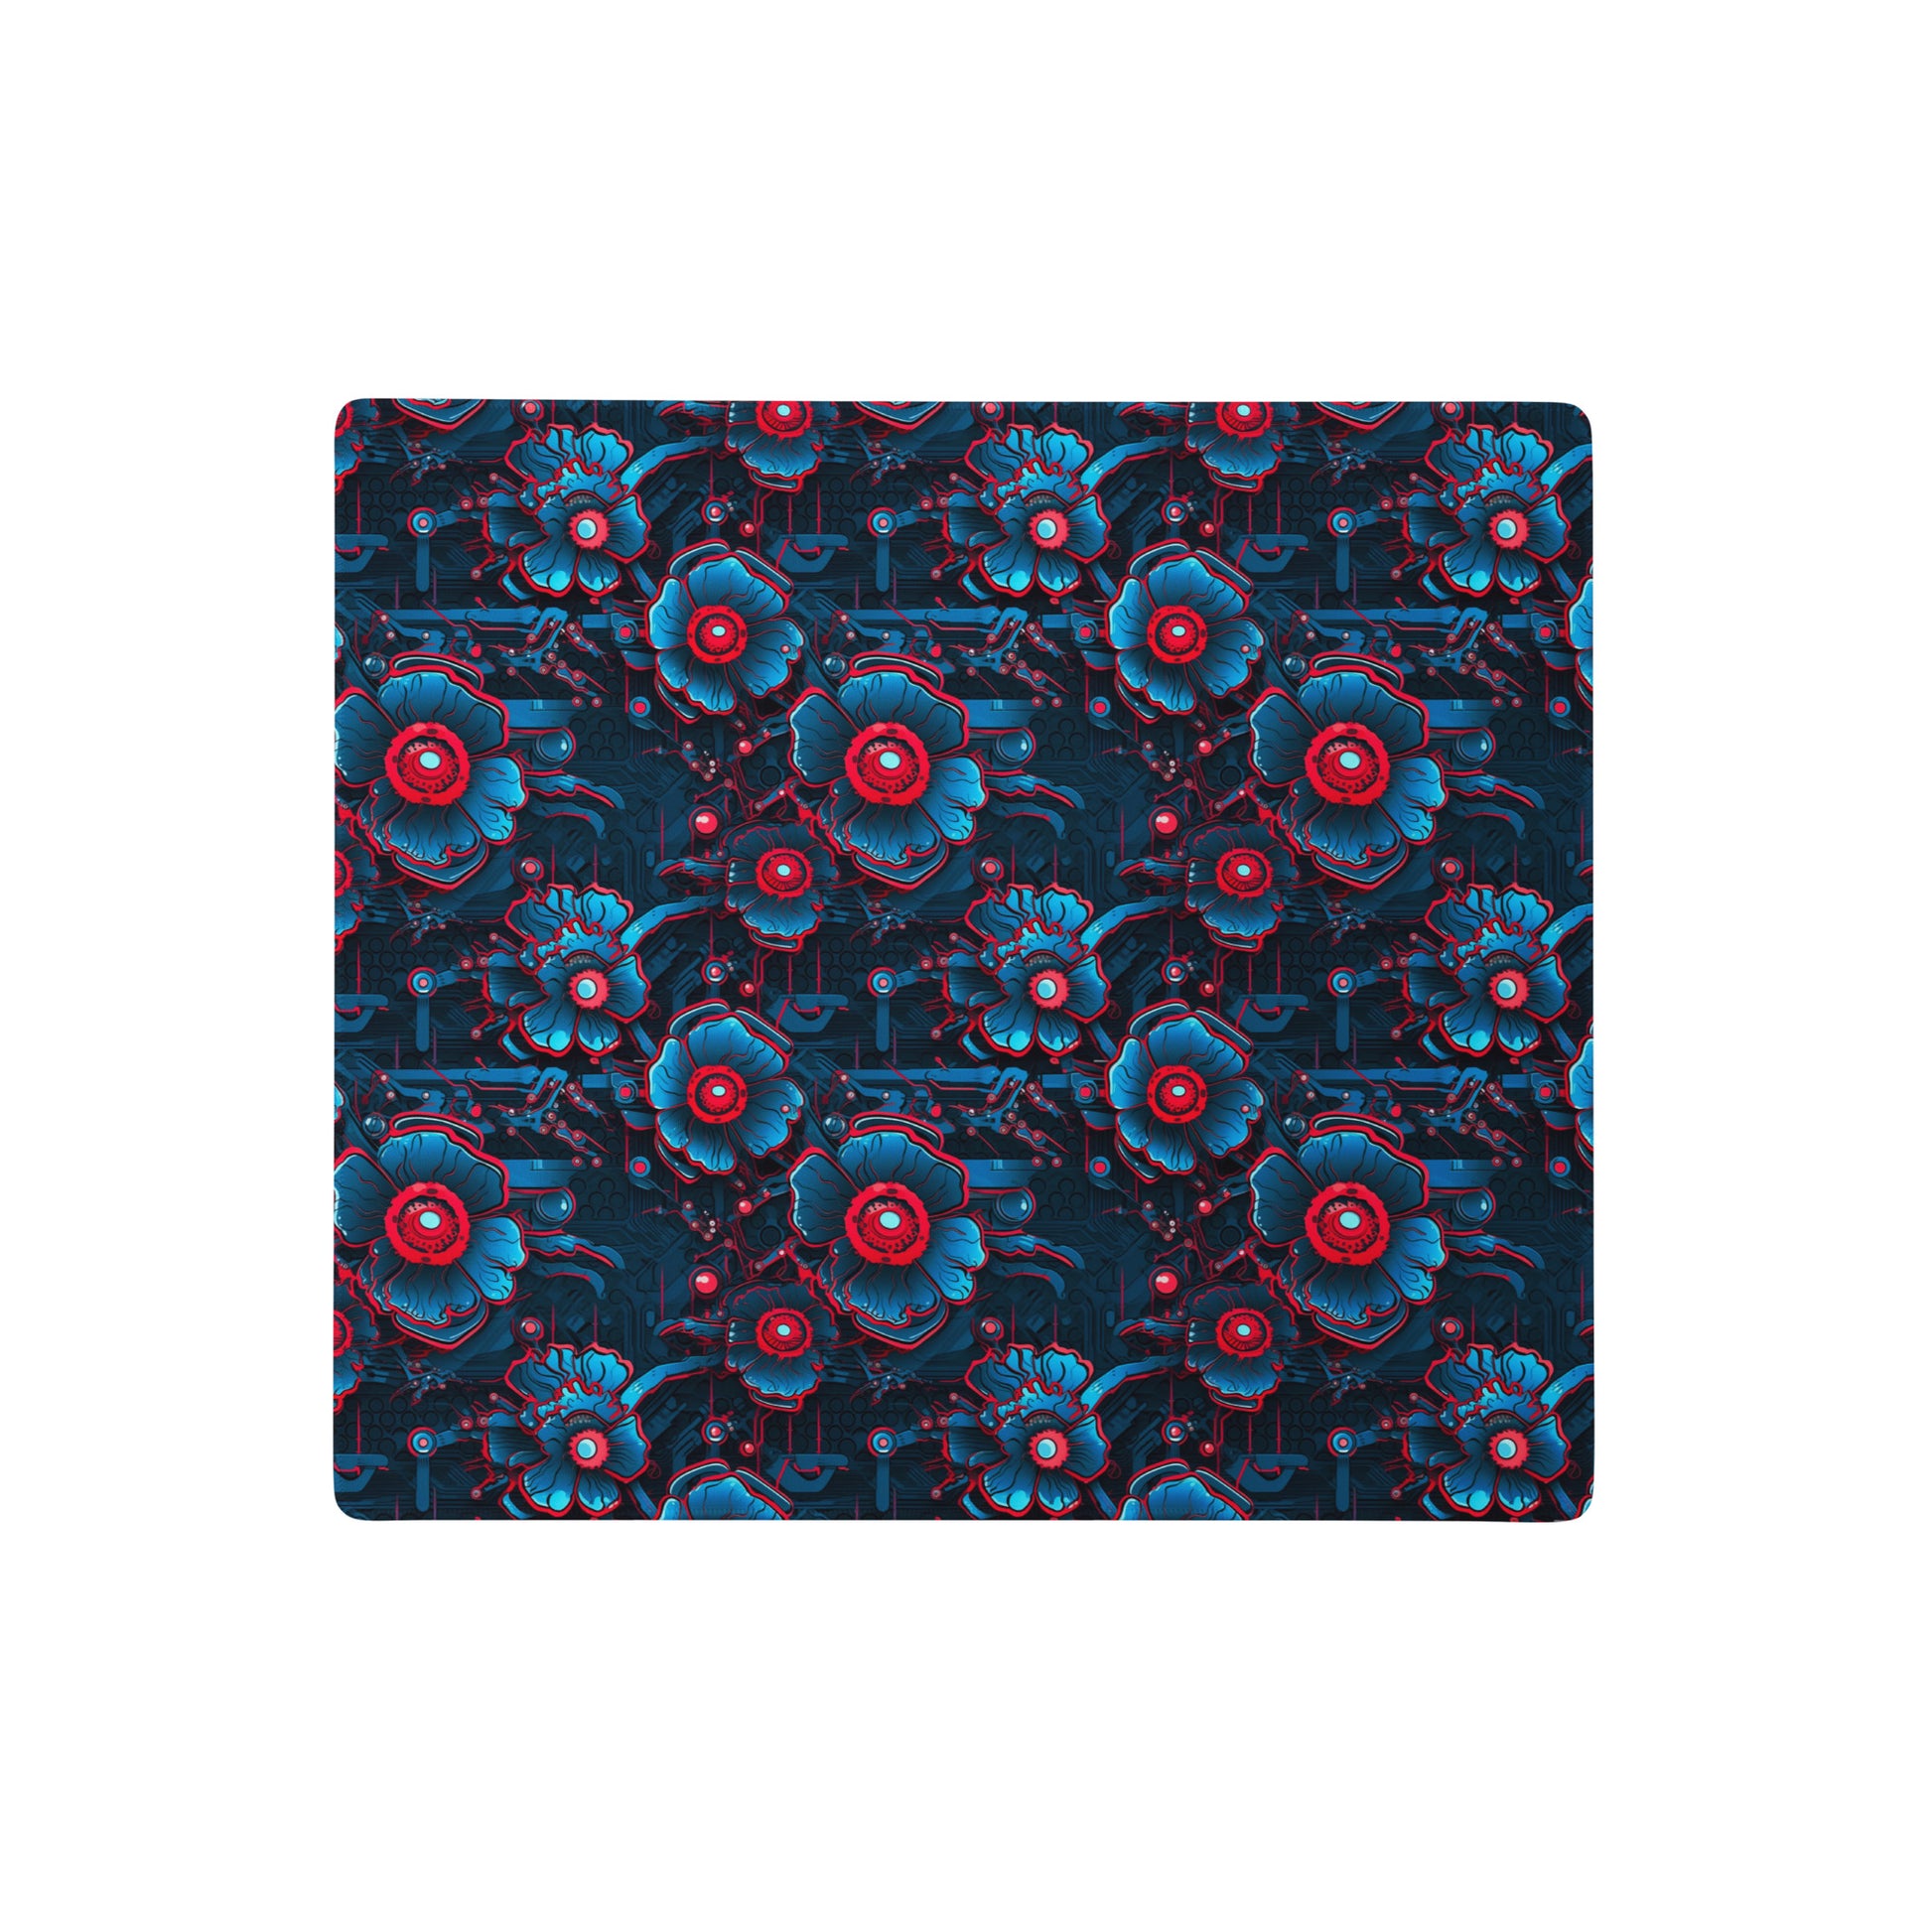 A 18" x 16" desk pad with a blue and red robotic floral pattern.